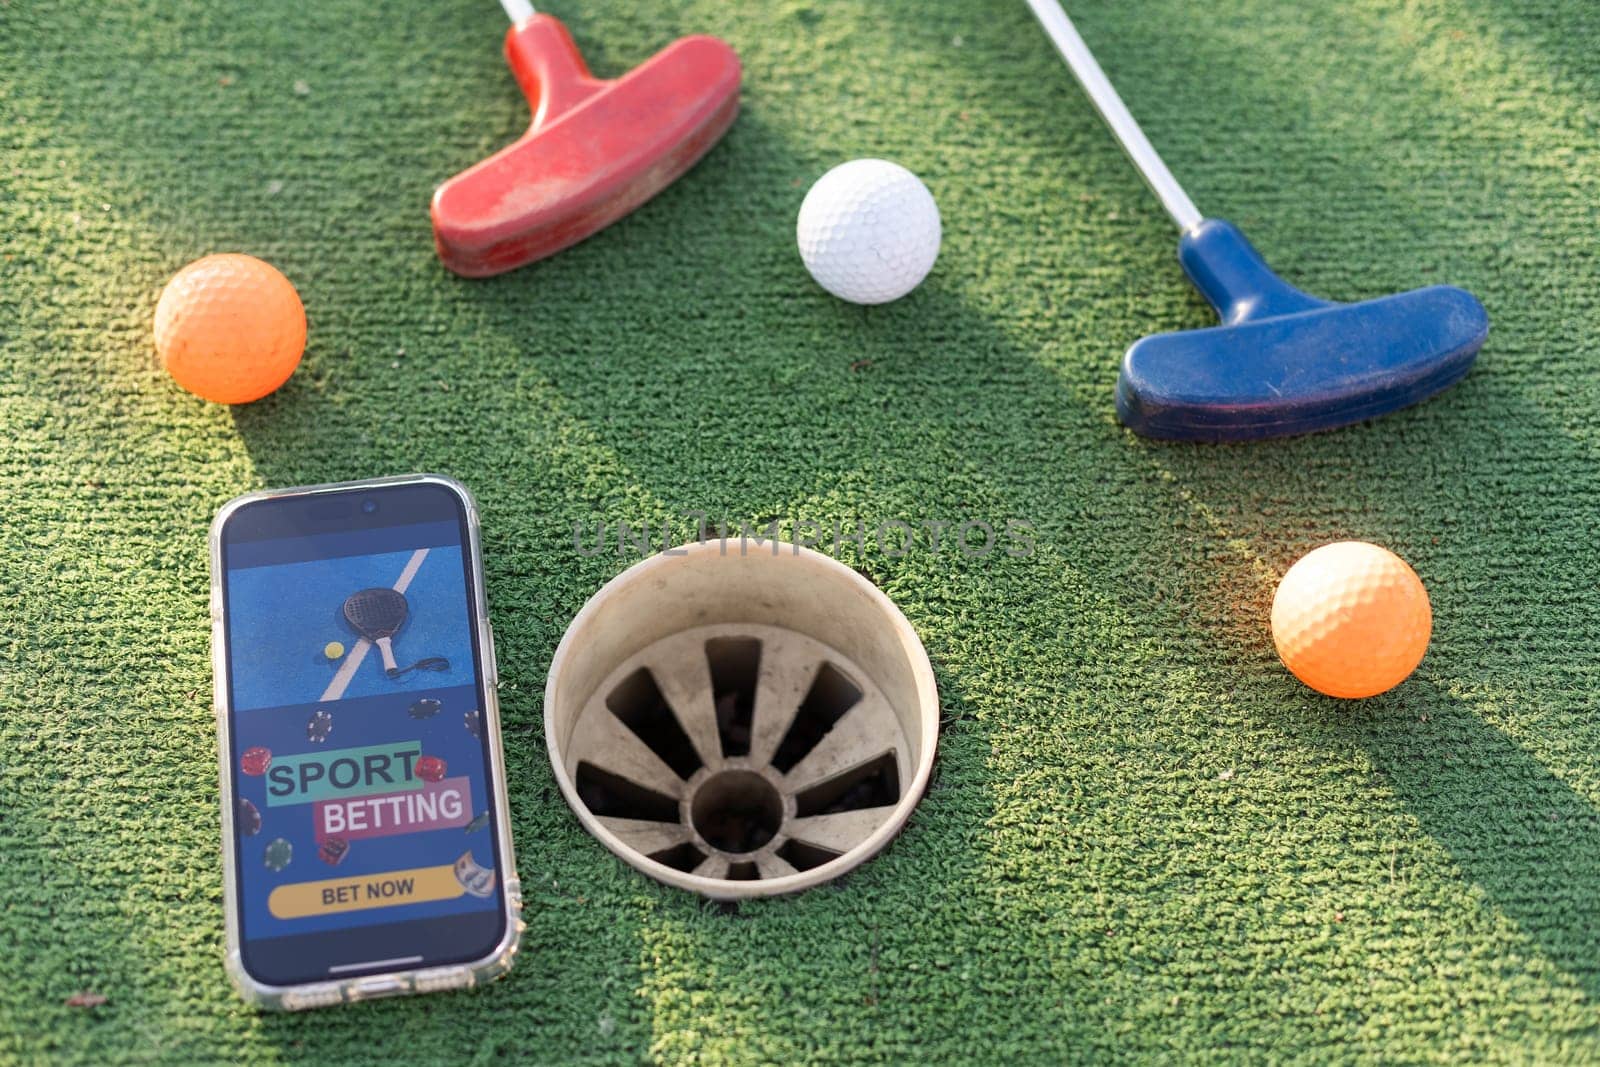 mini golf sports betting on a smartphone by Andelov13